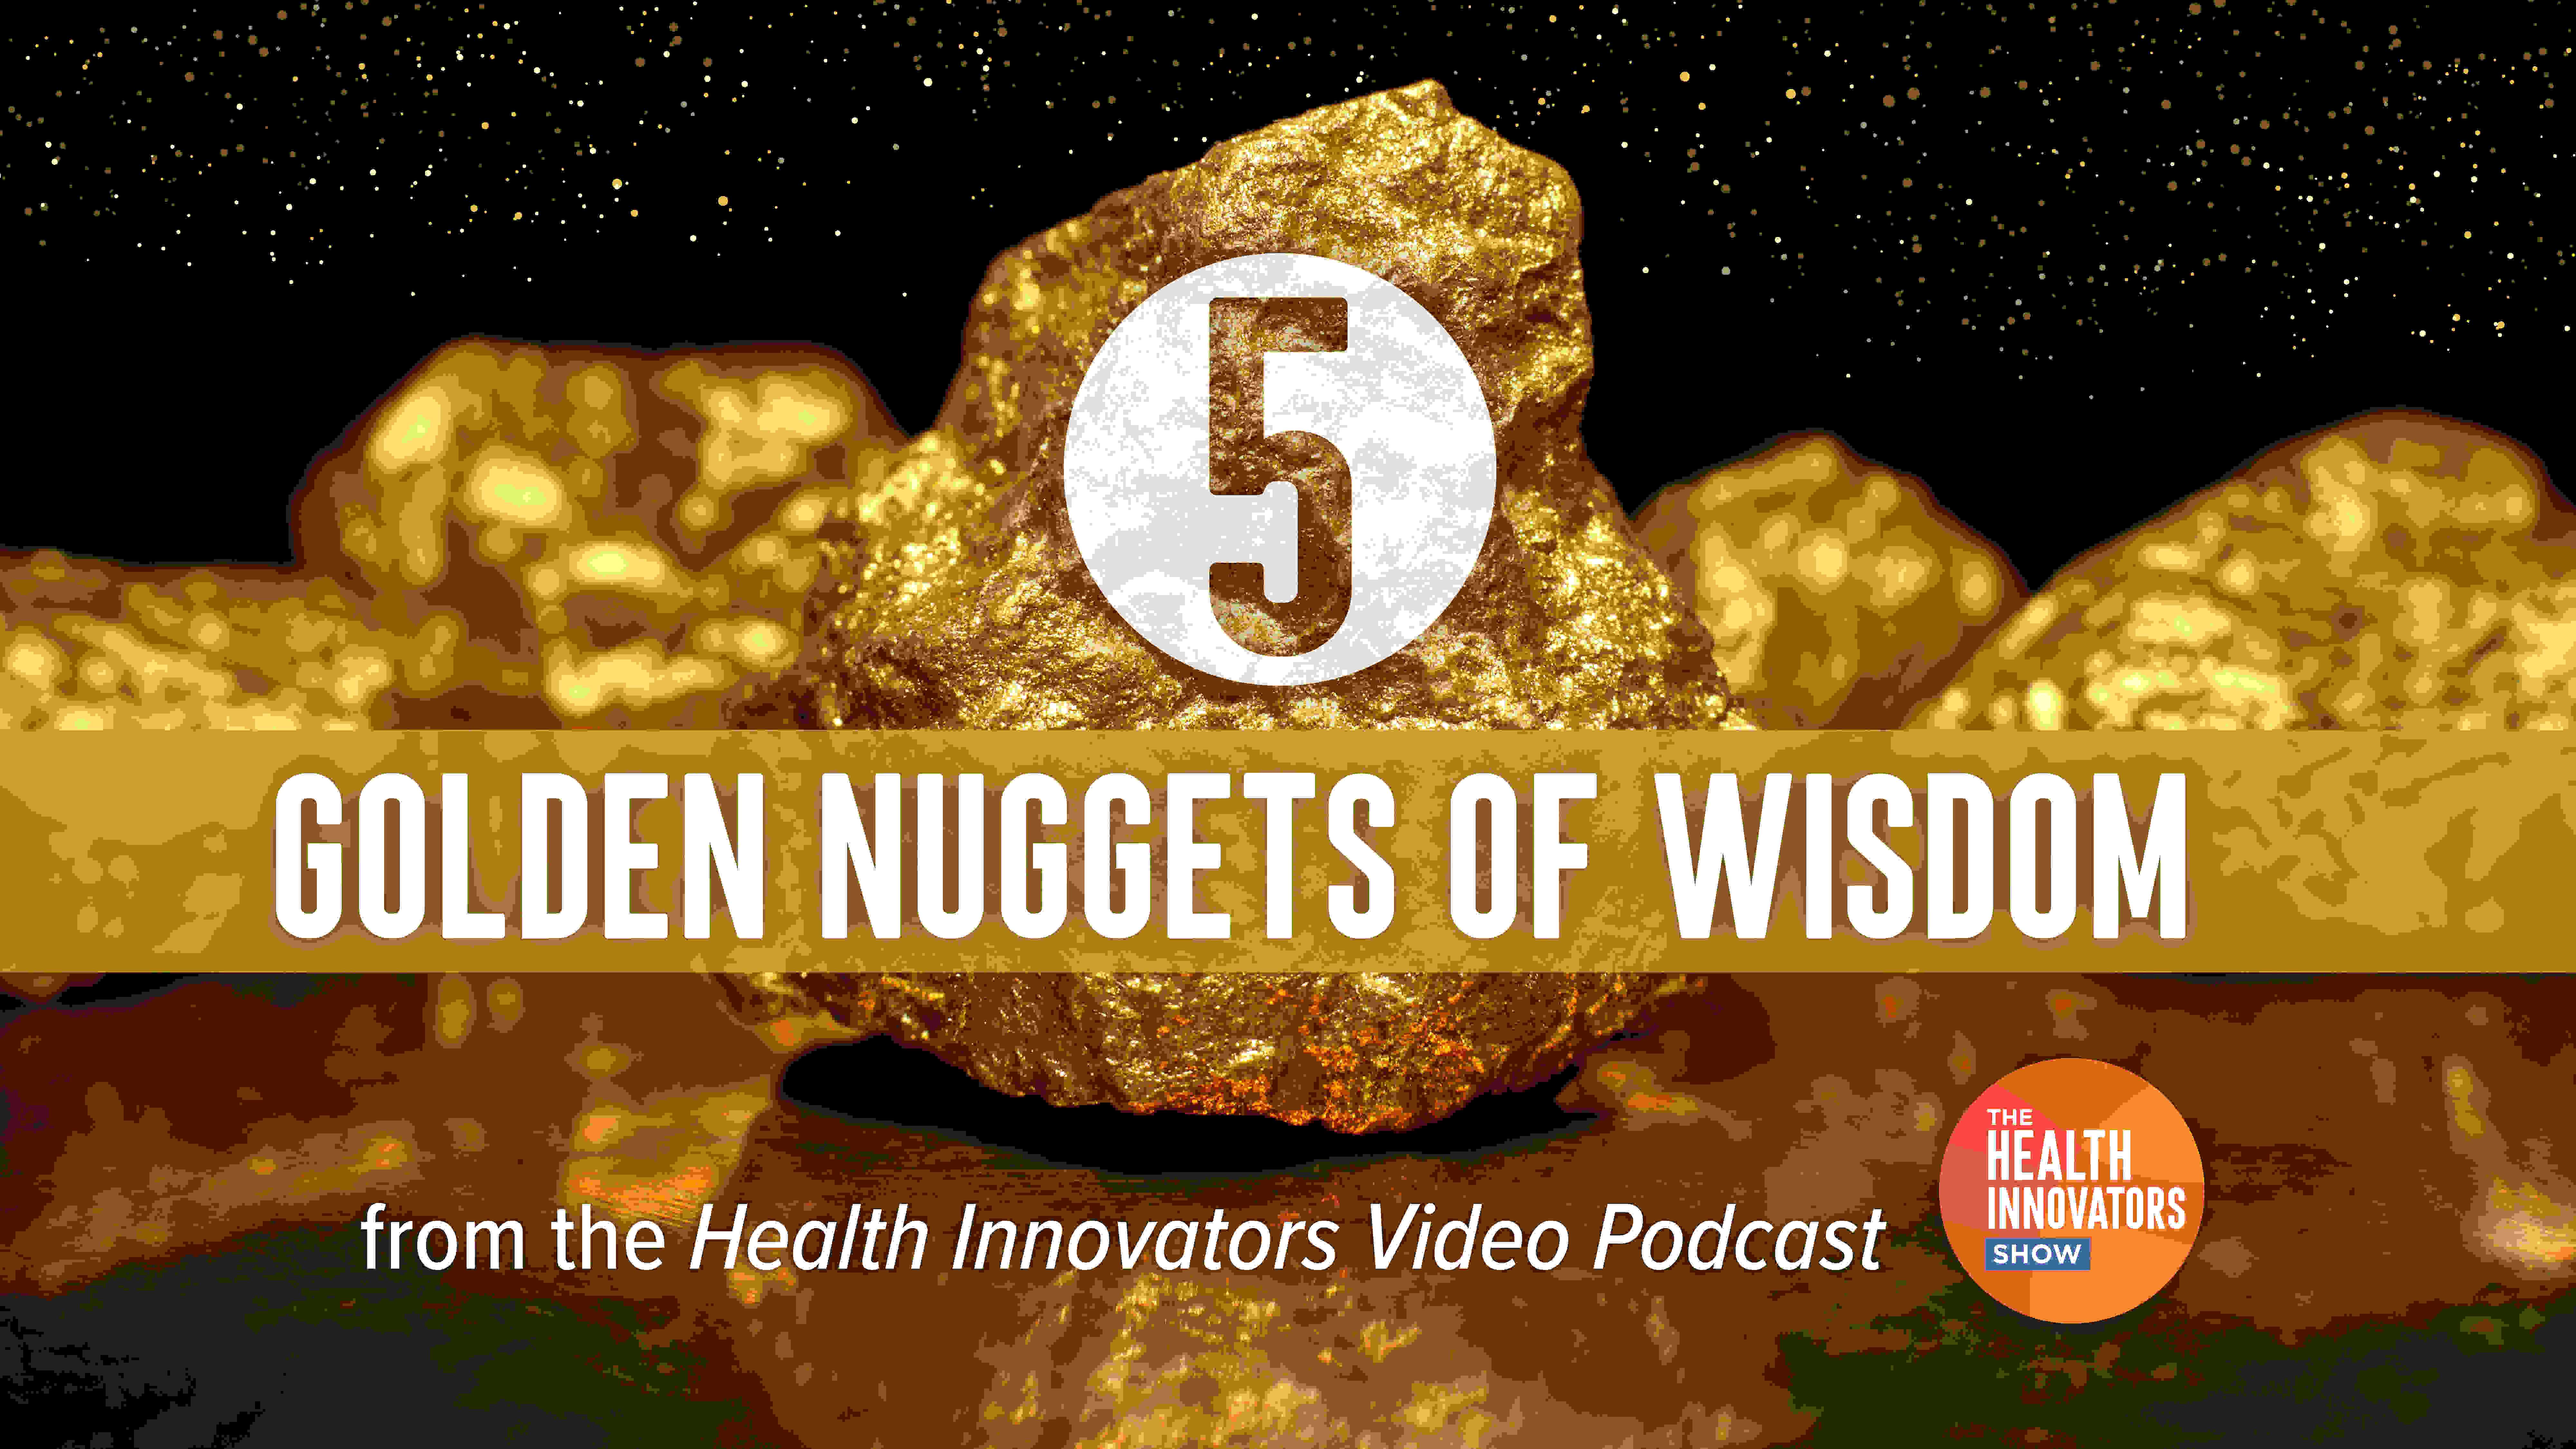 5 Golden Nuggets of Wisdom from the Health Innovators